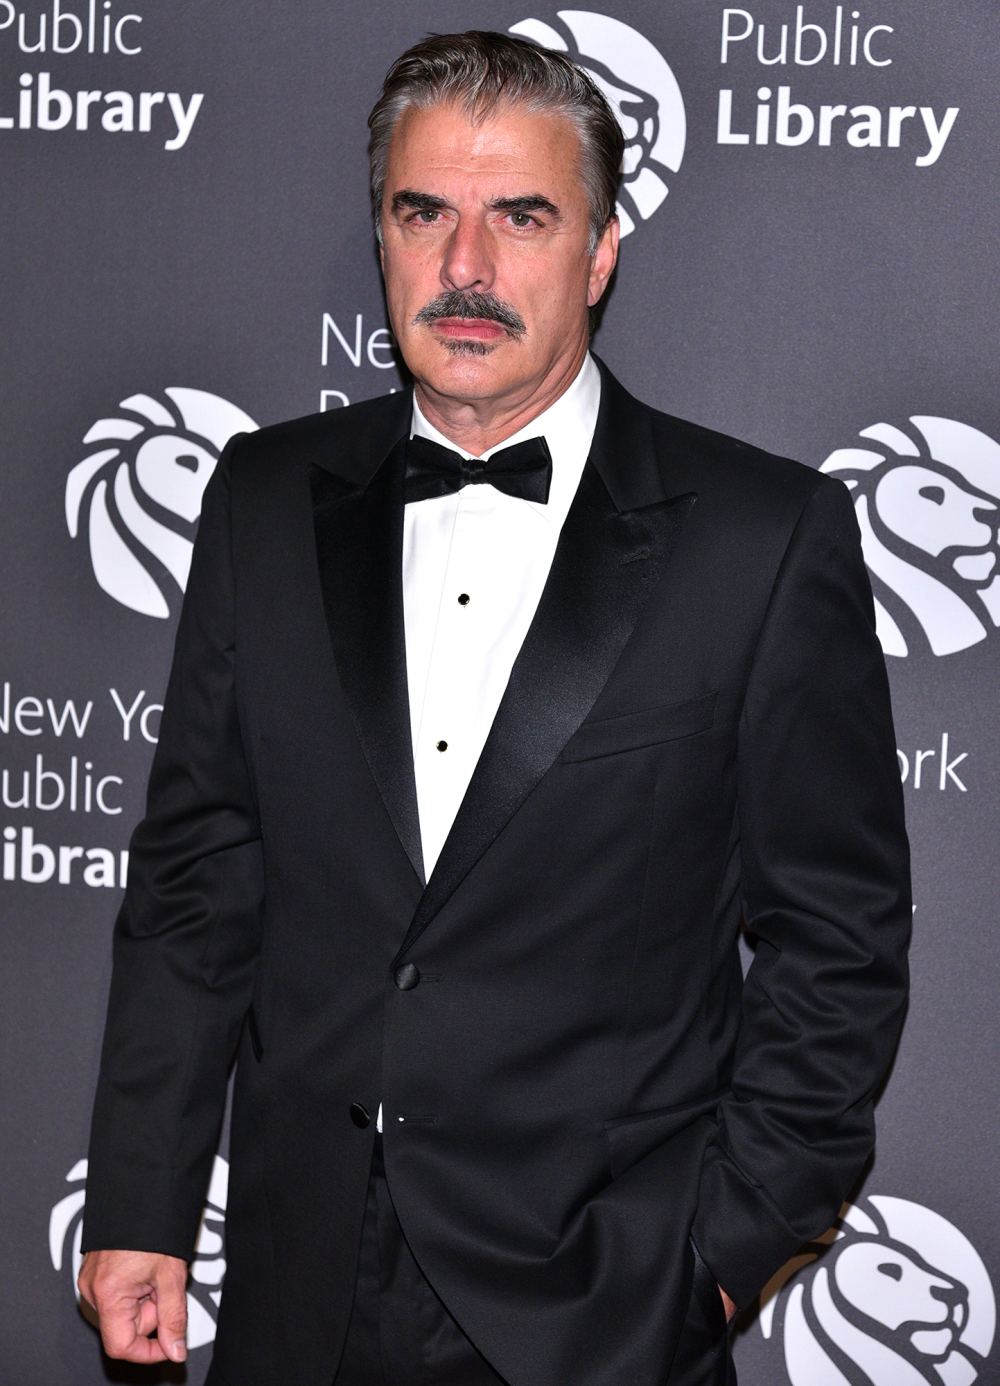 Chris Noth Dropped By Agency Amid Sexual Assault Allegations, Third Woman Came Forward With Claims